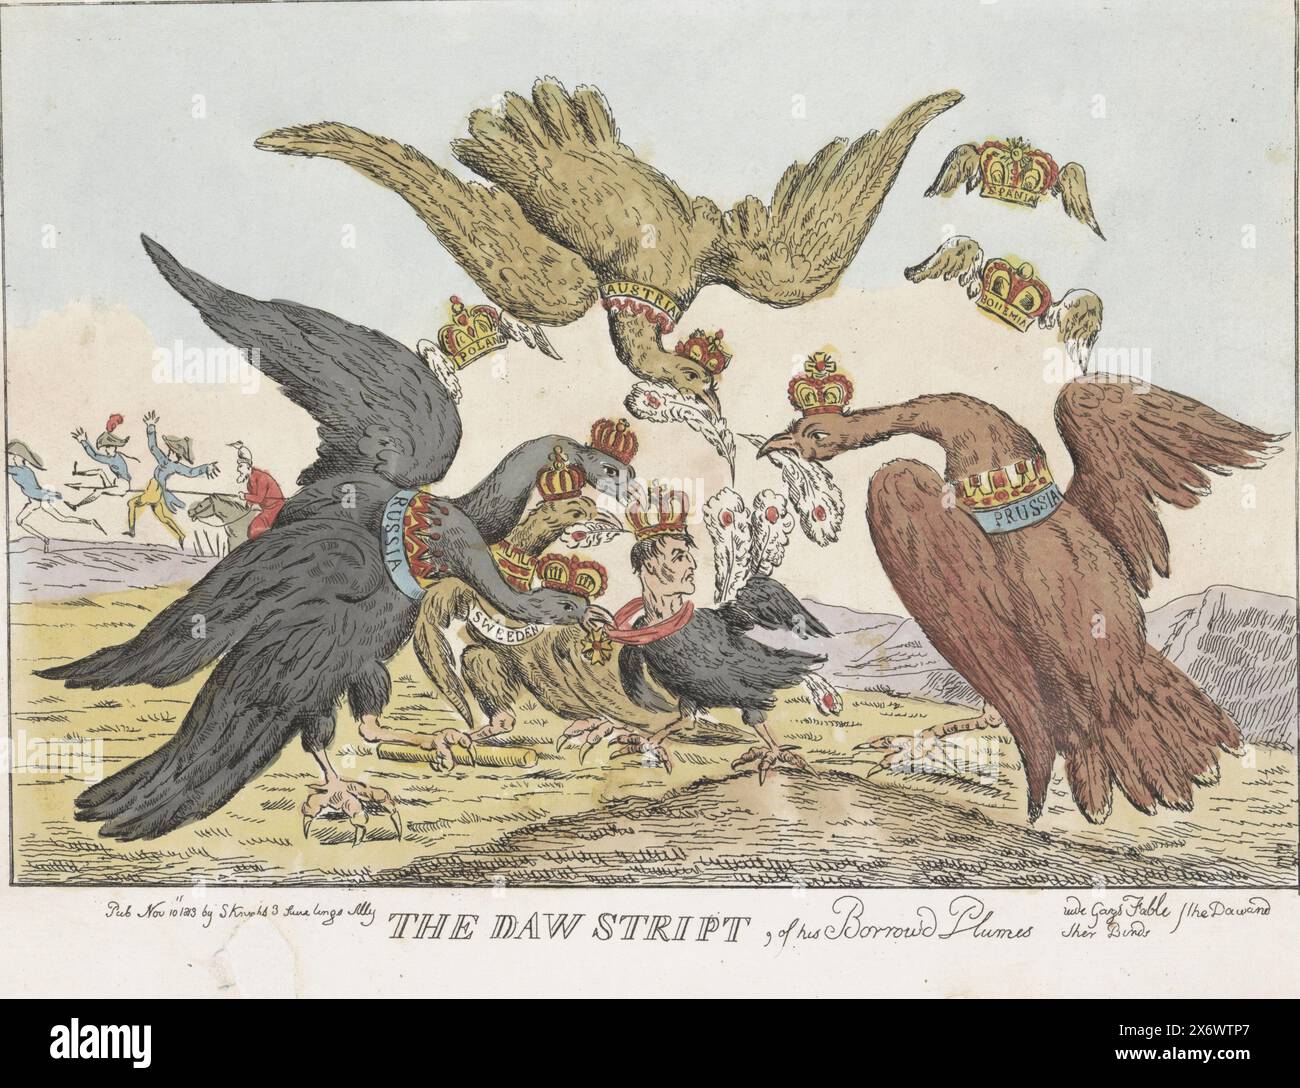 The jackdaw stripped of its borrowed feathers, 1813, The Daw Stript, of his Borrowed Plumes, vide Gays Fable the Daw other Birds (title on object), Cartoon of Napoleon after his loss at the battle of Leipzig, 1813. Four large eagles ( Russia, Prussia, Austria and Sweden) pluck the feathers from a jackdaw with the head of Napoleon. The jackdaw had decorated himself with these peacock feathers. Three winged crowns (Poland, Bohemia and Spain) fly away. In the background a Russian Cossack stabs two French soldiers with his lance. The print includes a separate Dutch statement., print, print maker: Stock Photo